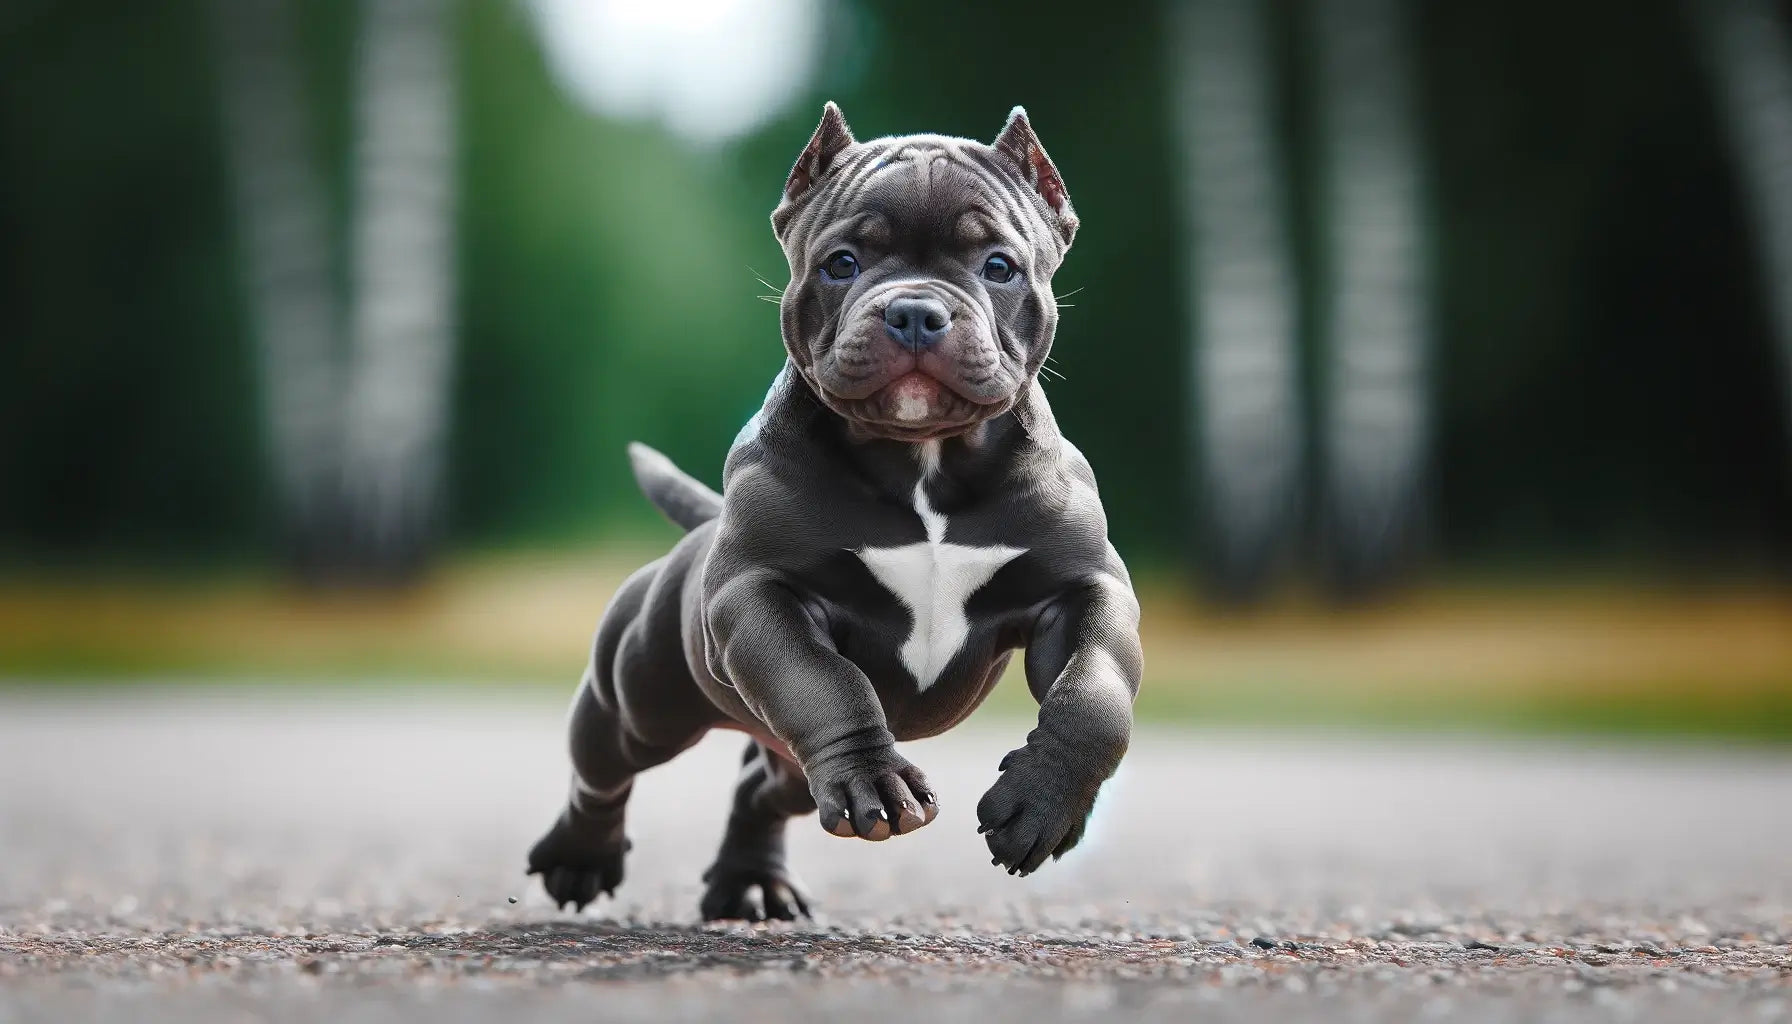 Micro Bully with muscular and strong legs, showcasing its solid and powerful build